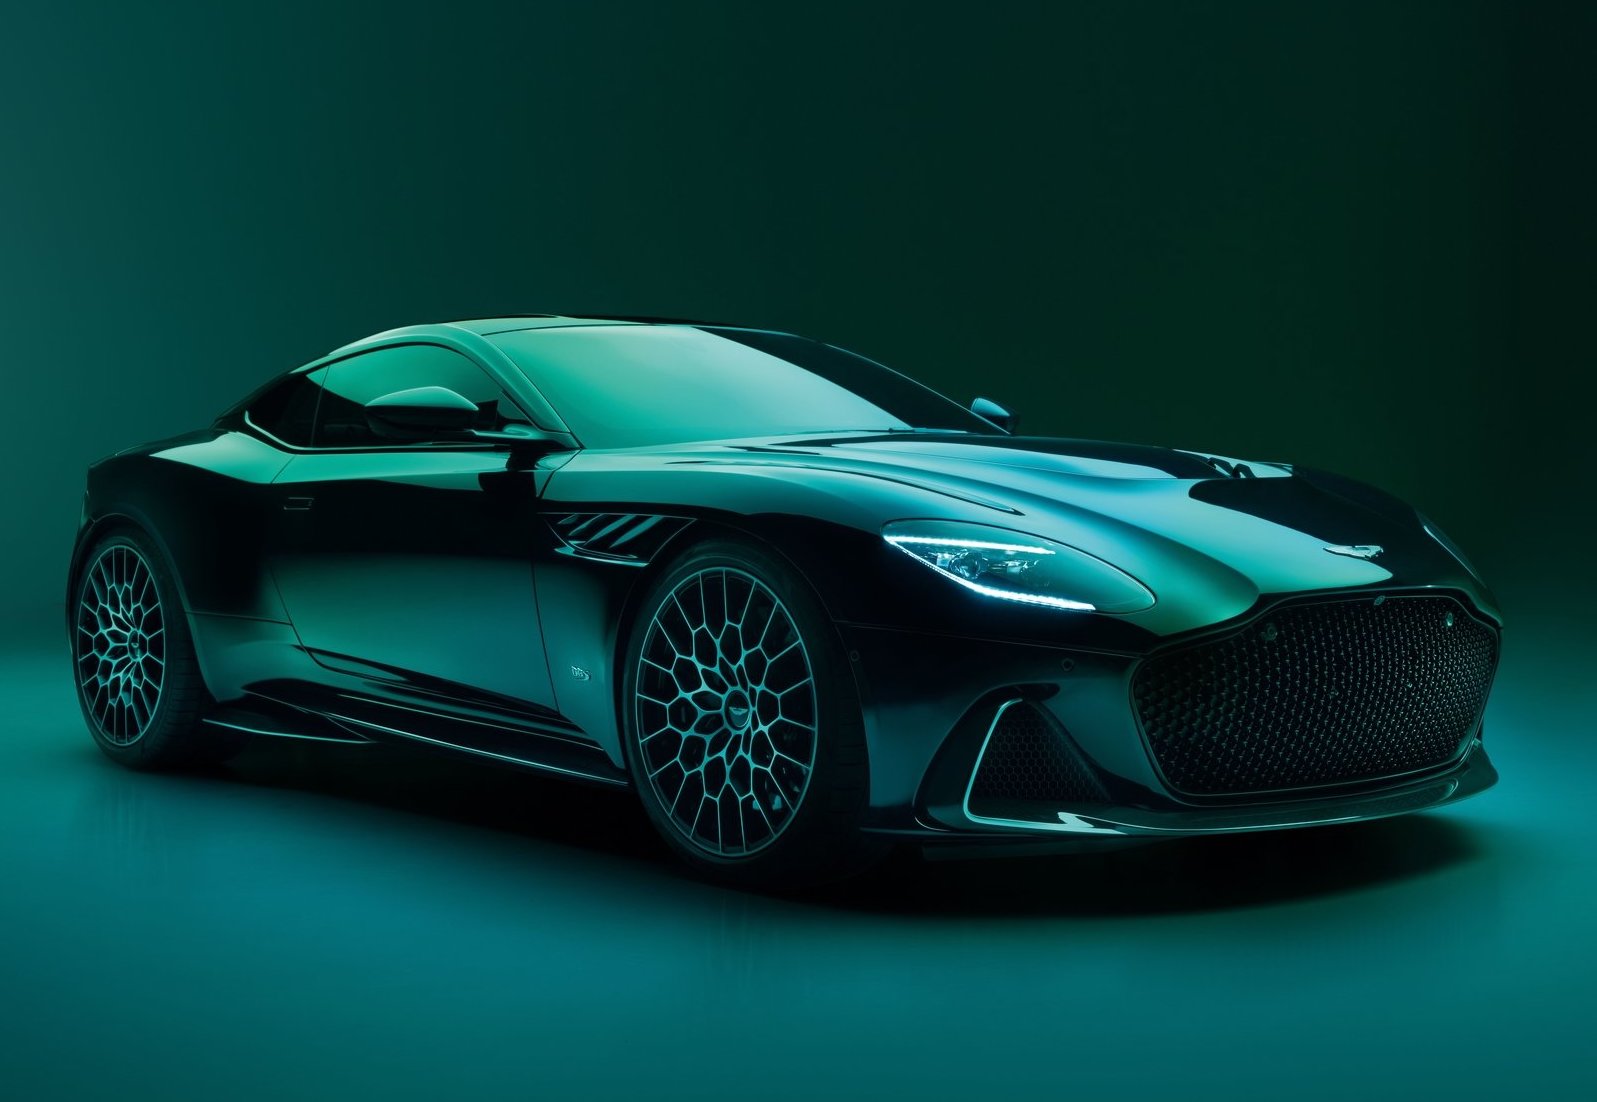 New Aston Martin DBS 770 Ultimate unveiled, last of the current generation